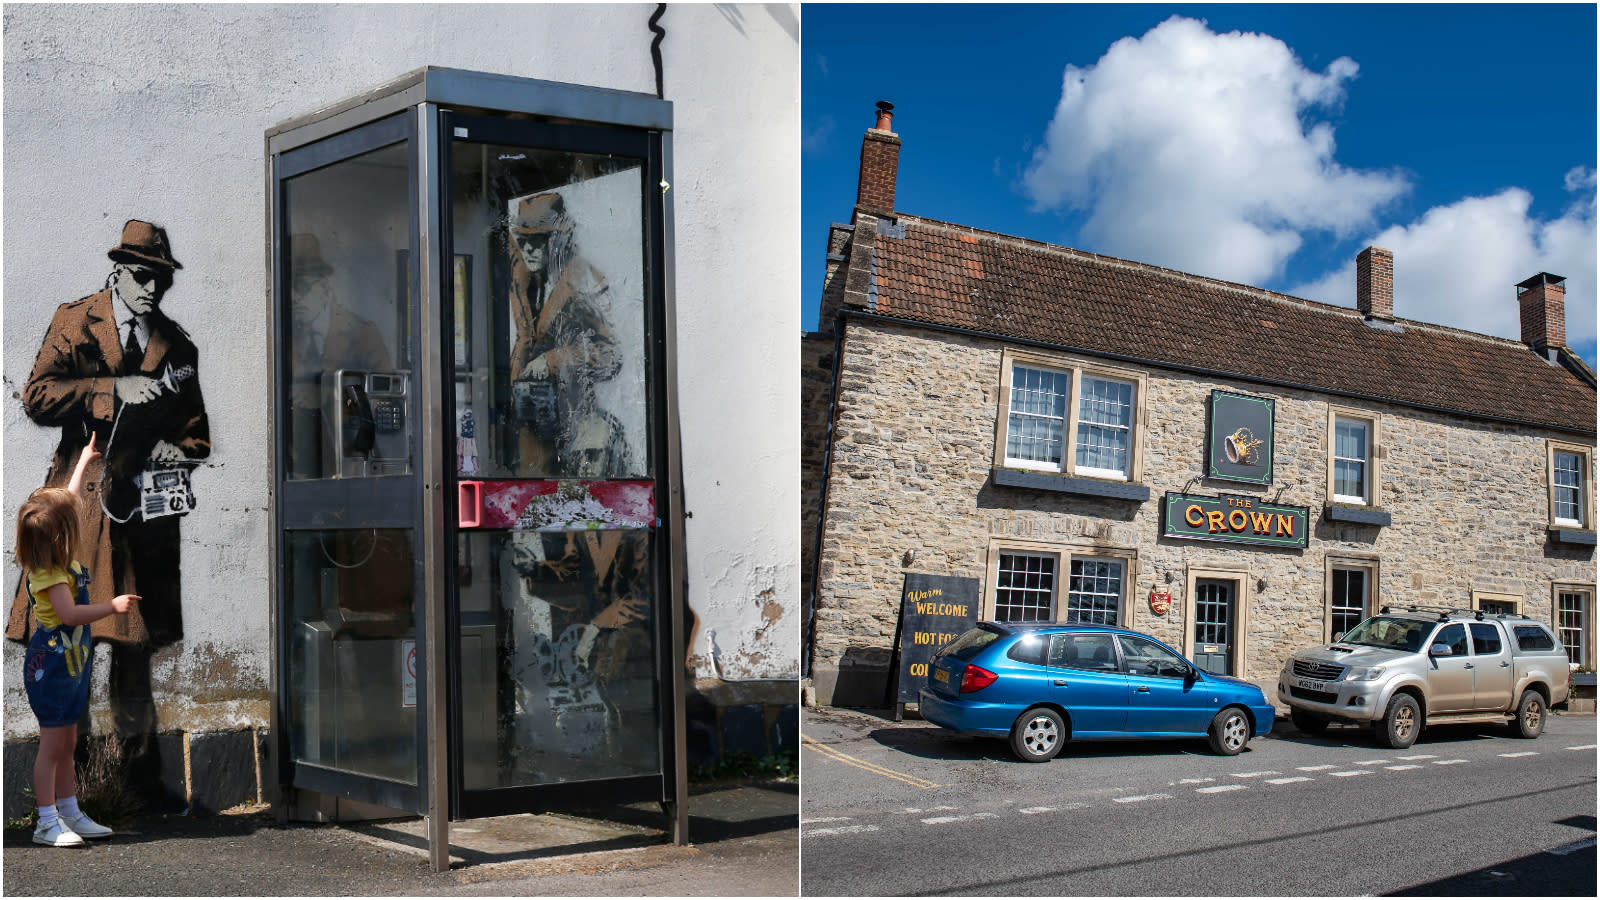 Banksy has been linked The Crown pub in Somerset. (Getty and SWNS)